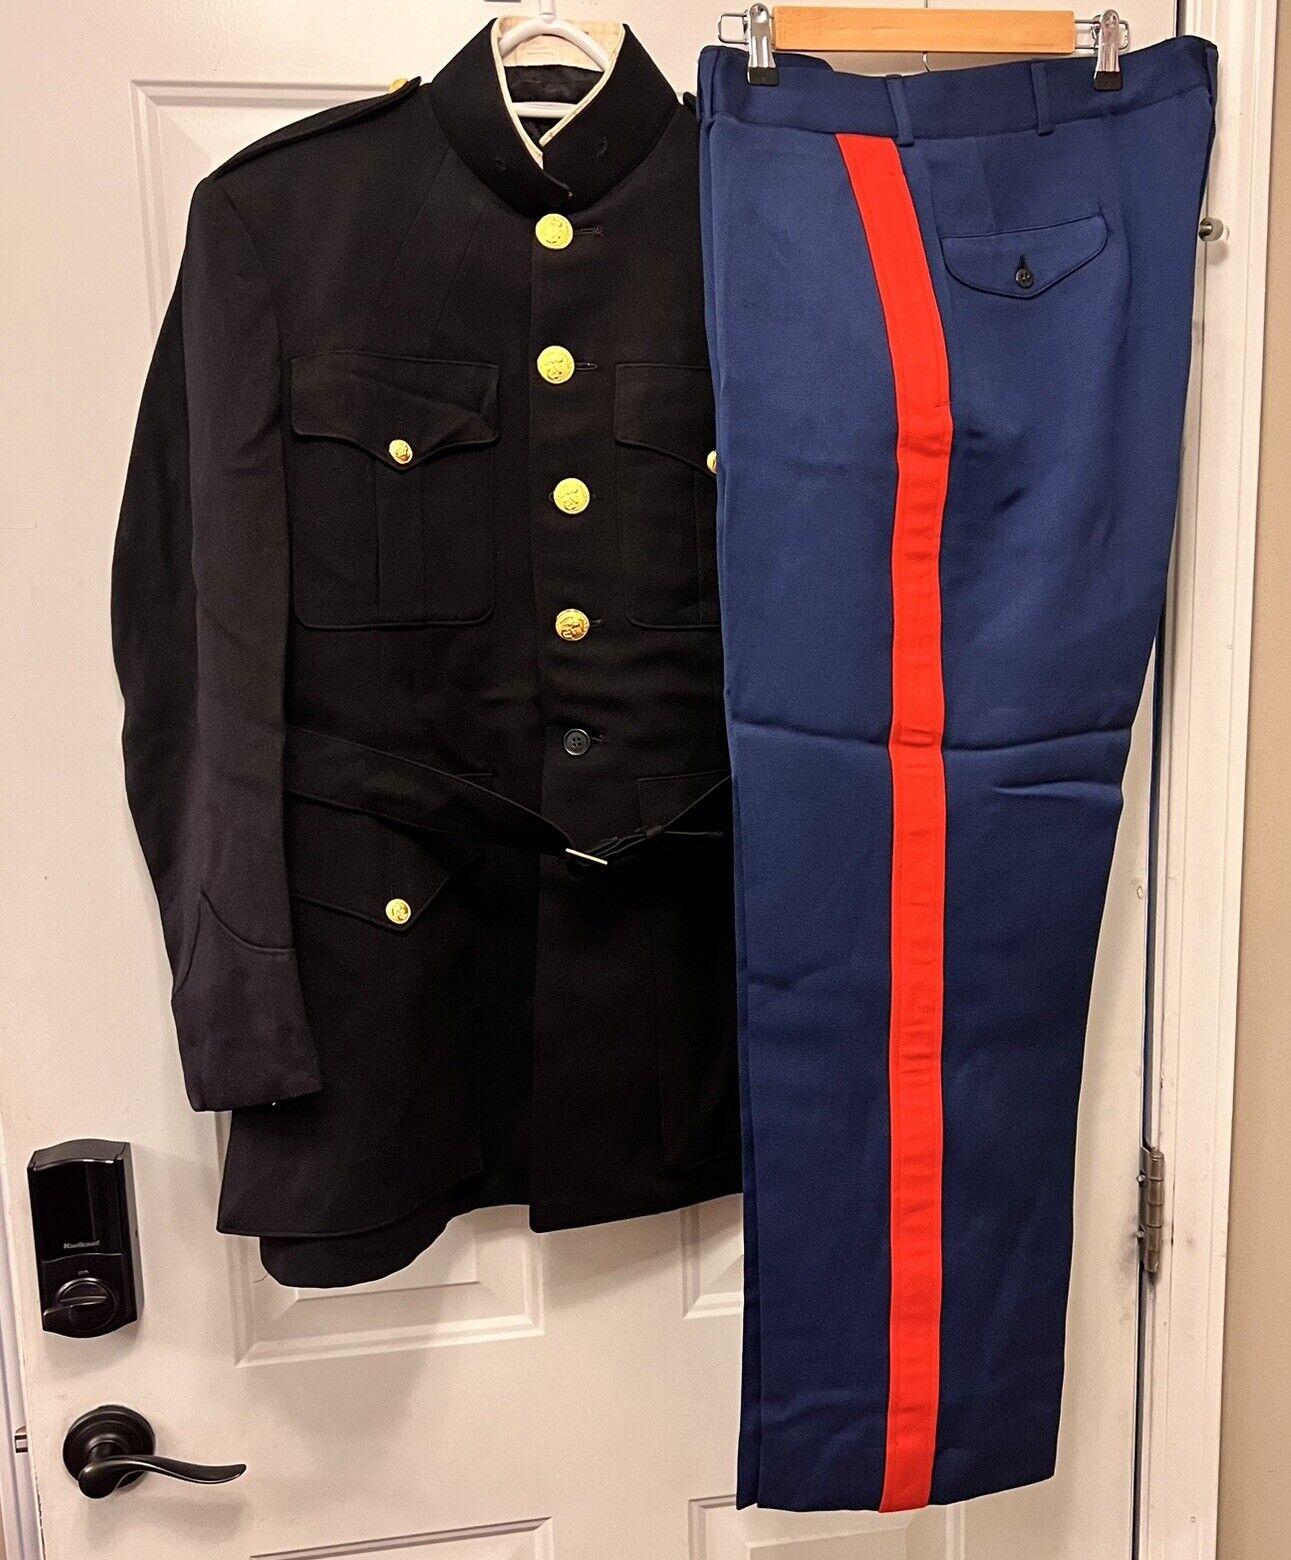 Vintage US Marine Corps Officer Dress Blues 1950's Wool W/ Name Tape Inside